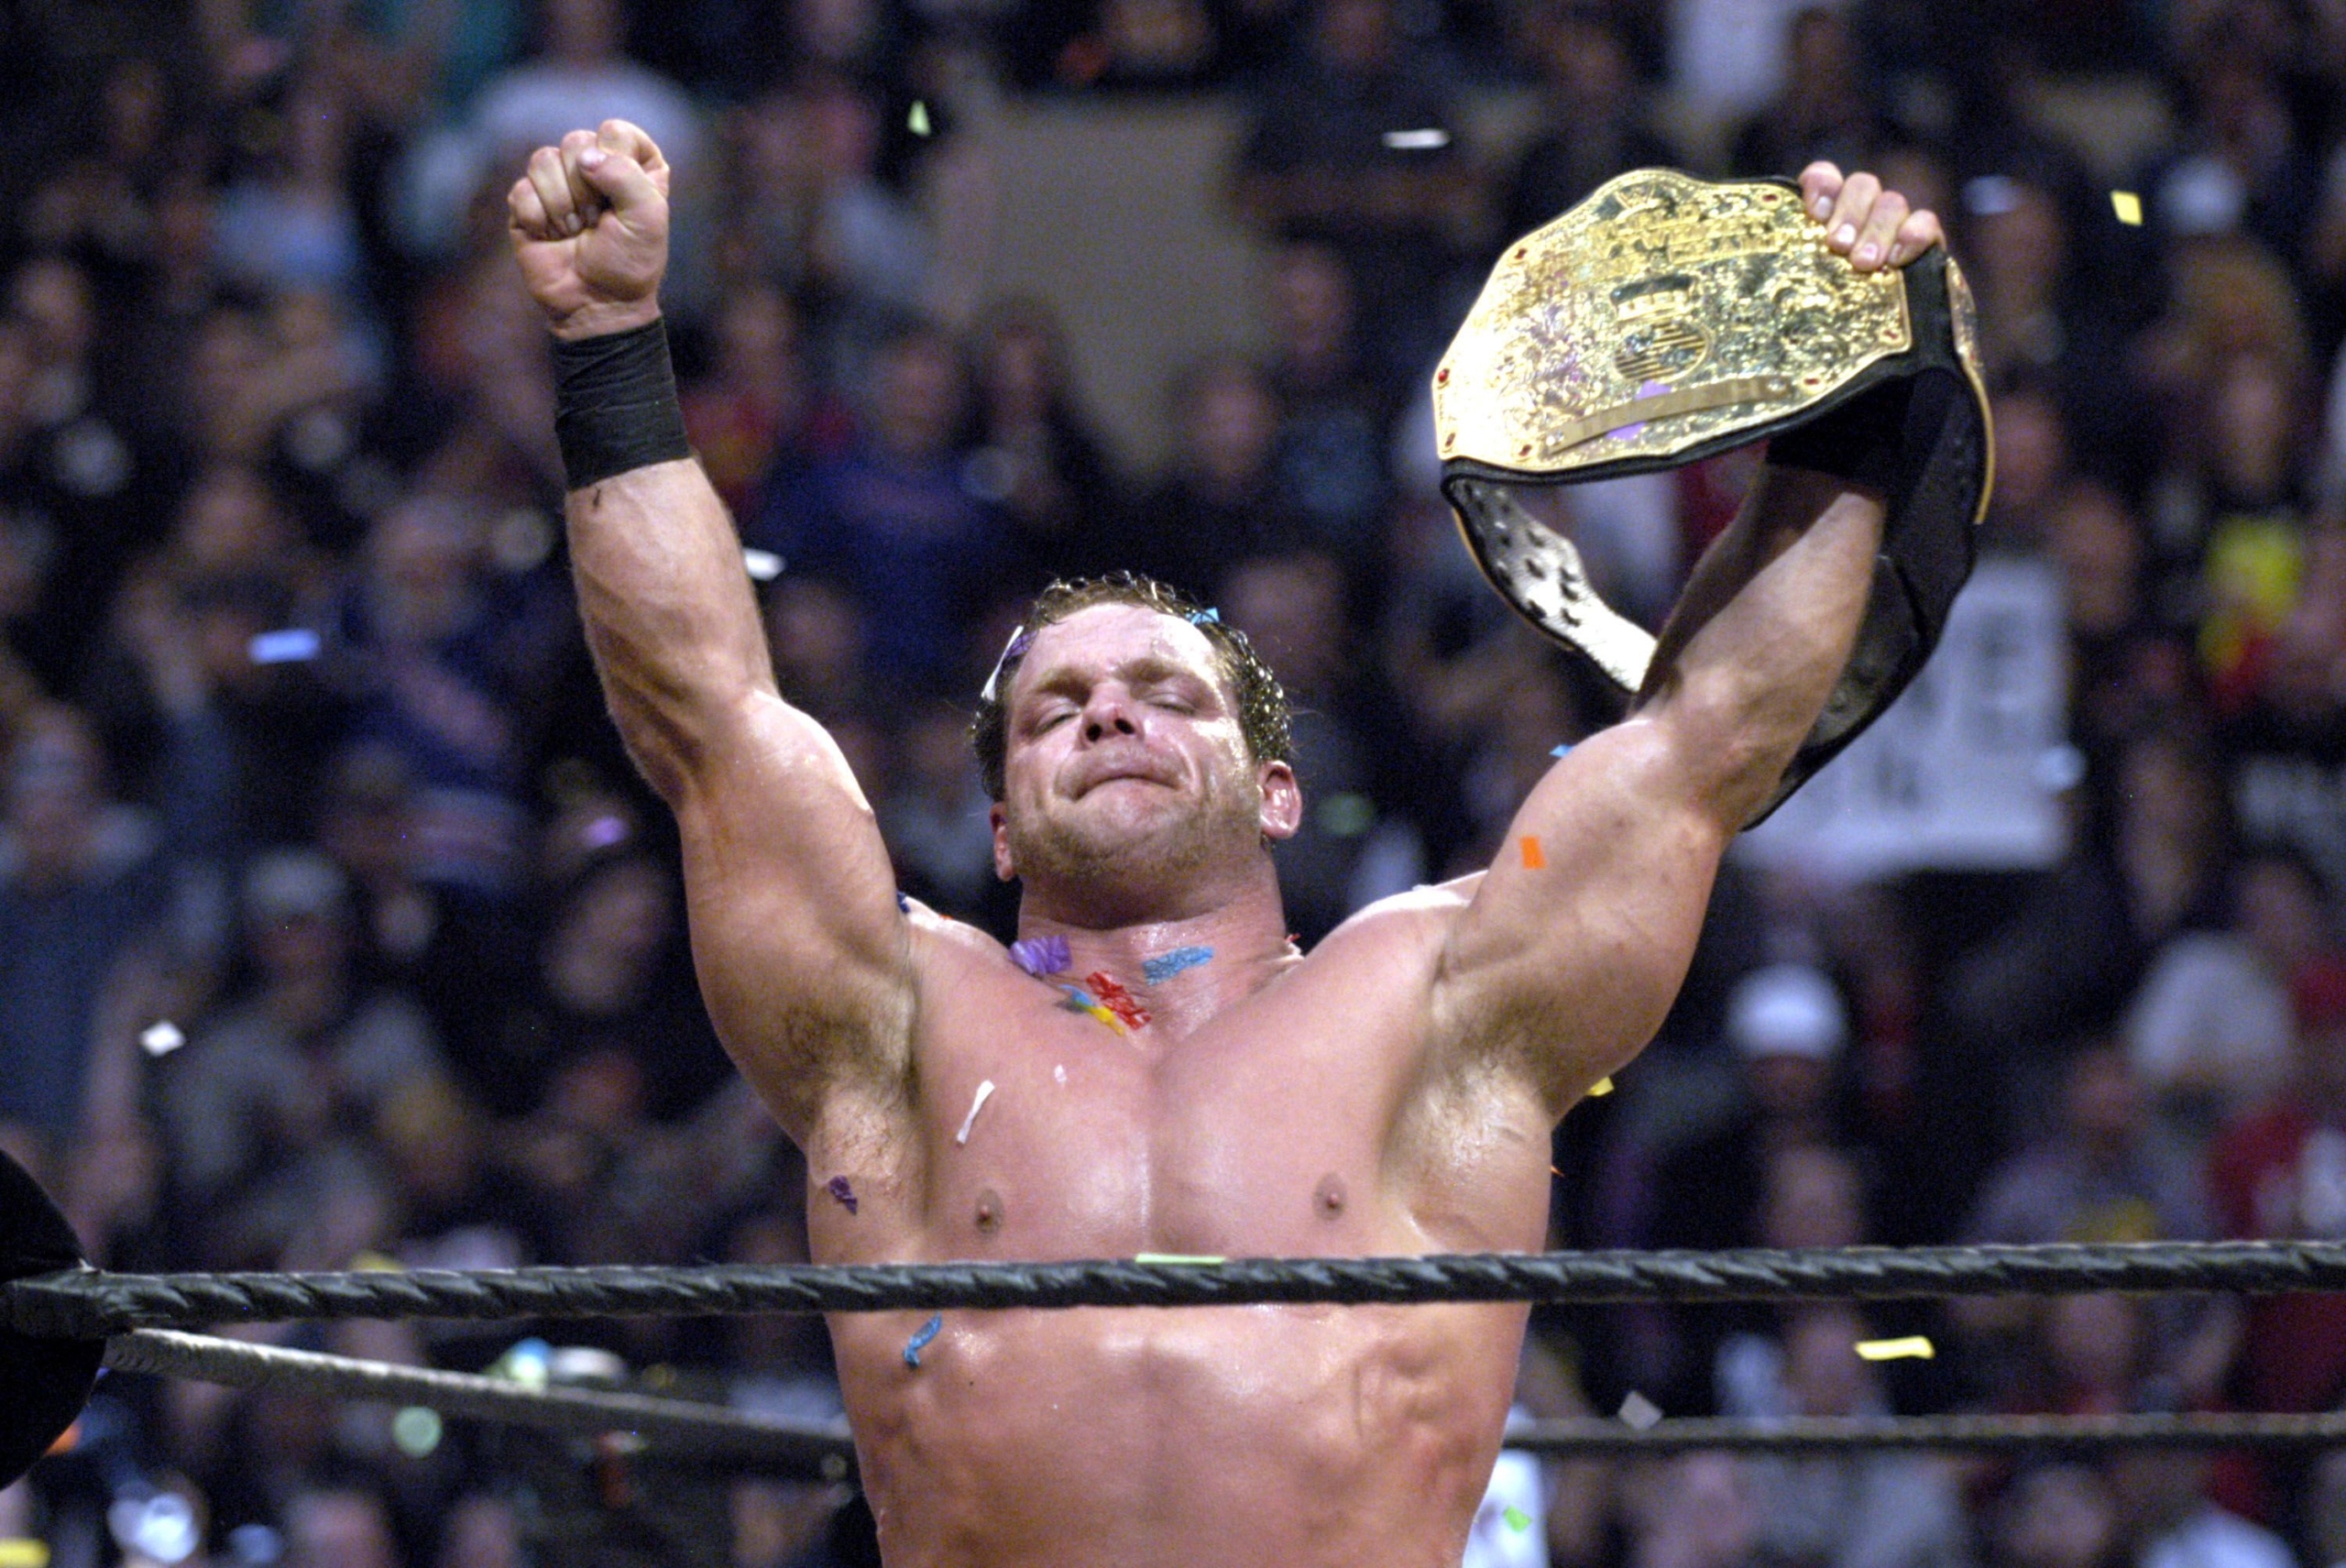 Chris Benoit murdered his wife and son